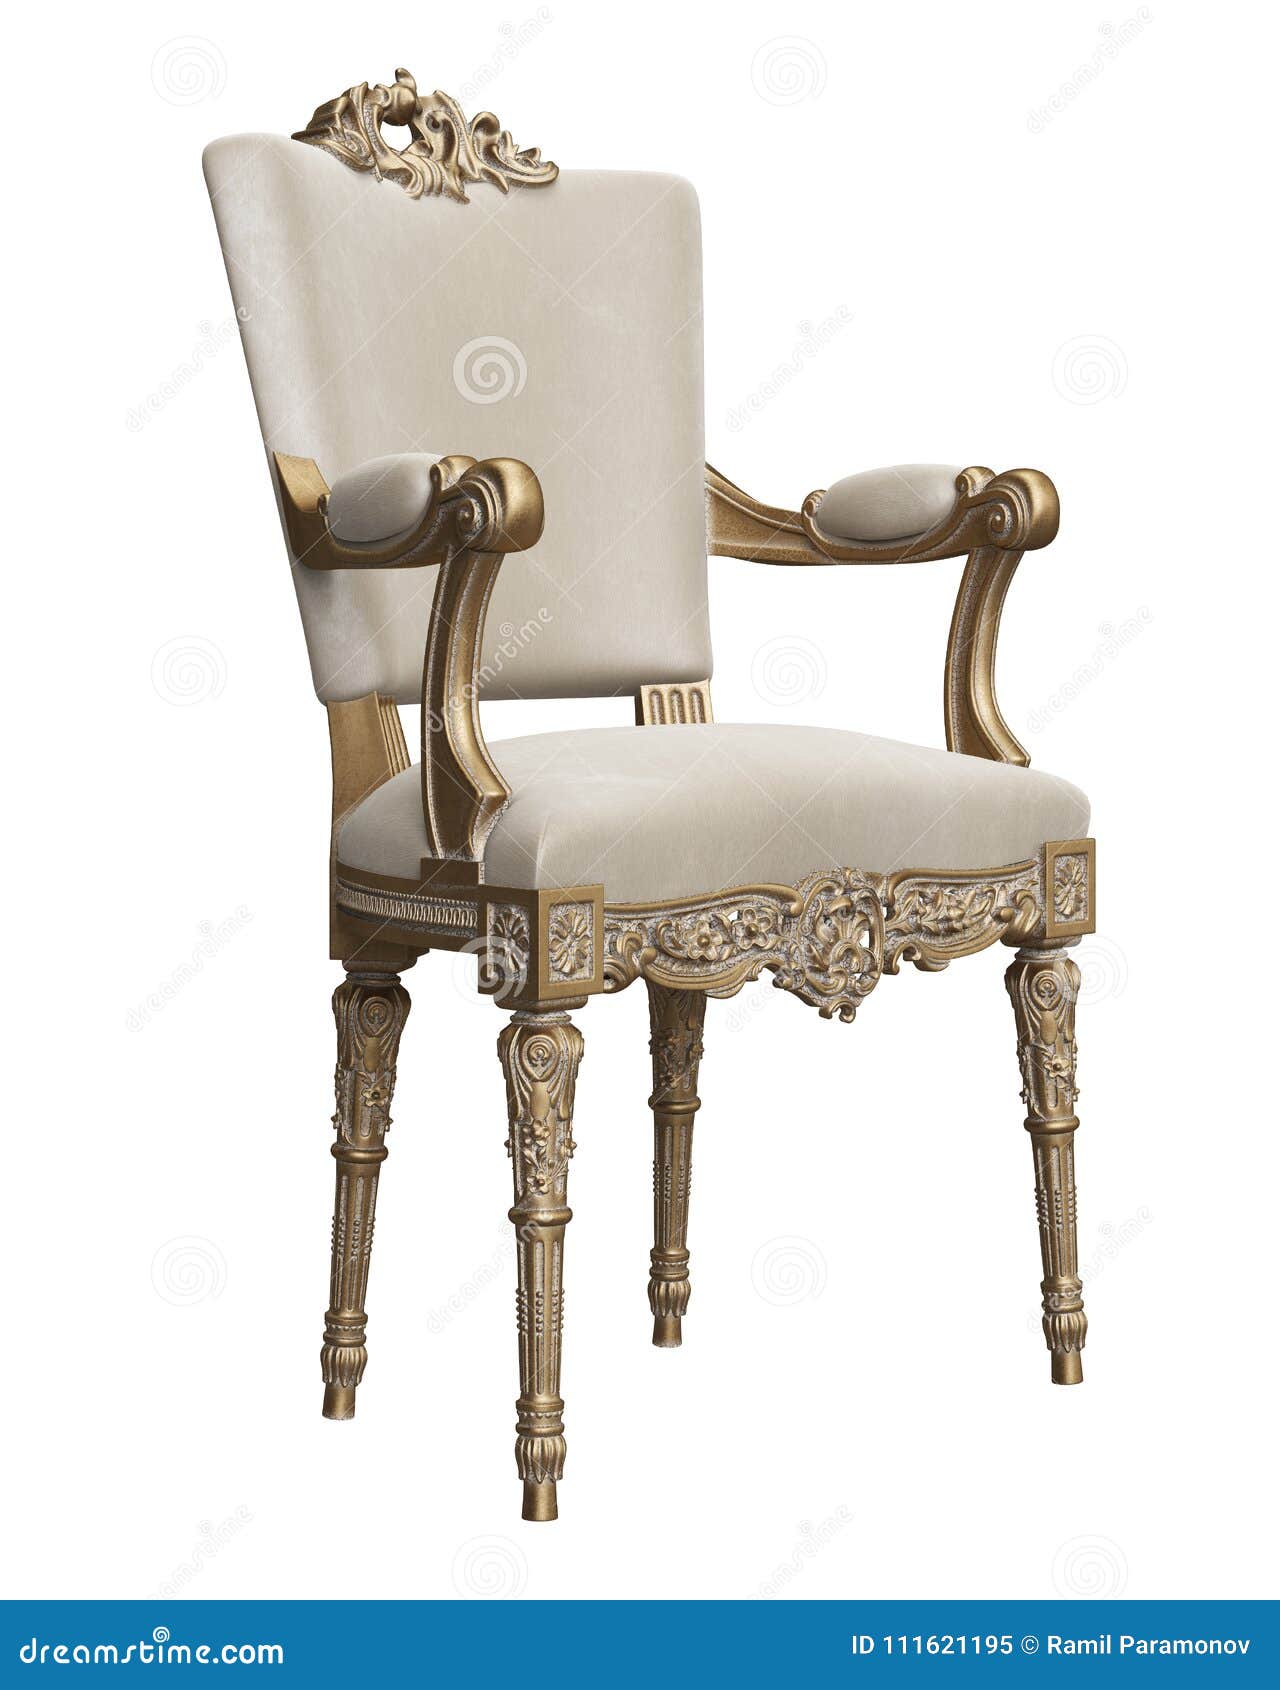 Classic Baroque Chair In Gold And Ivory Colors Isolated On White